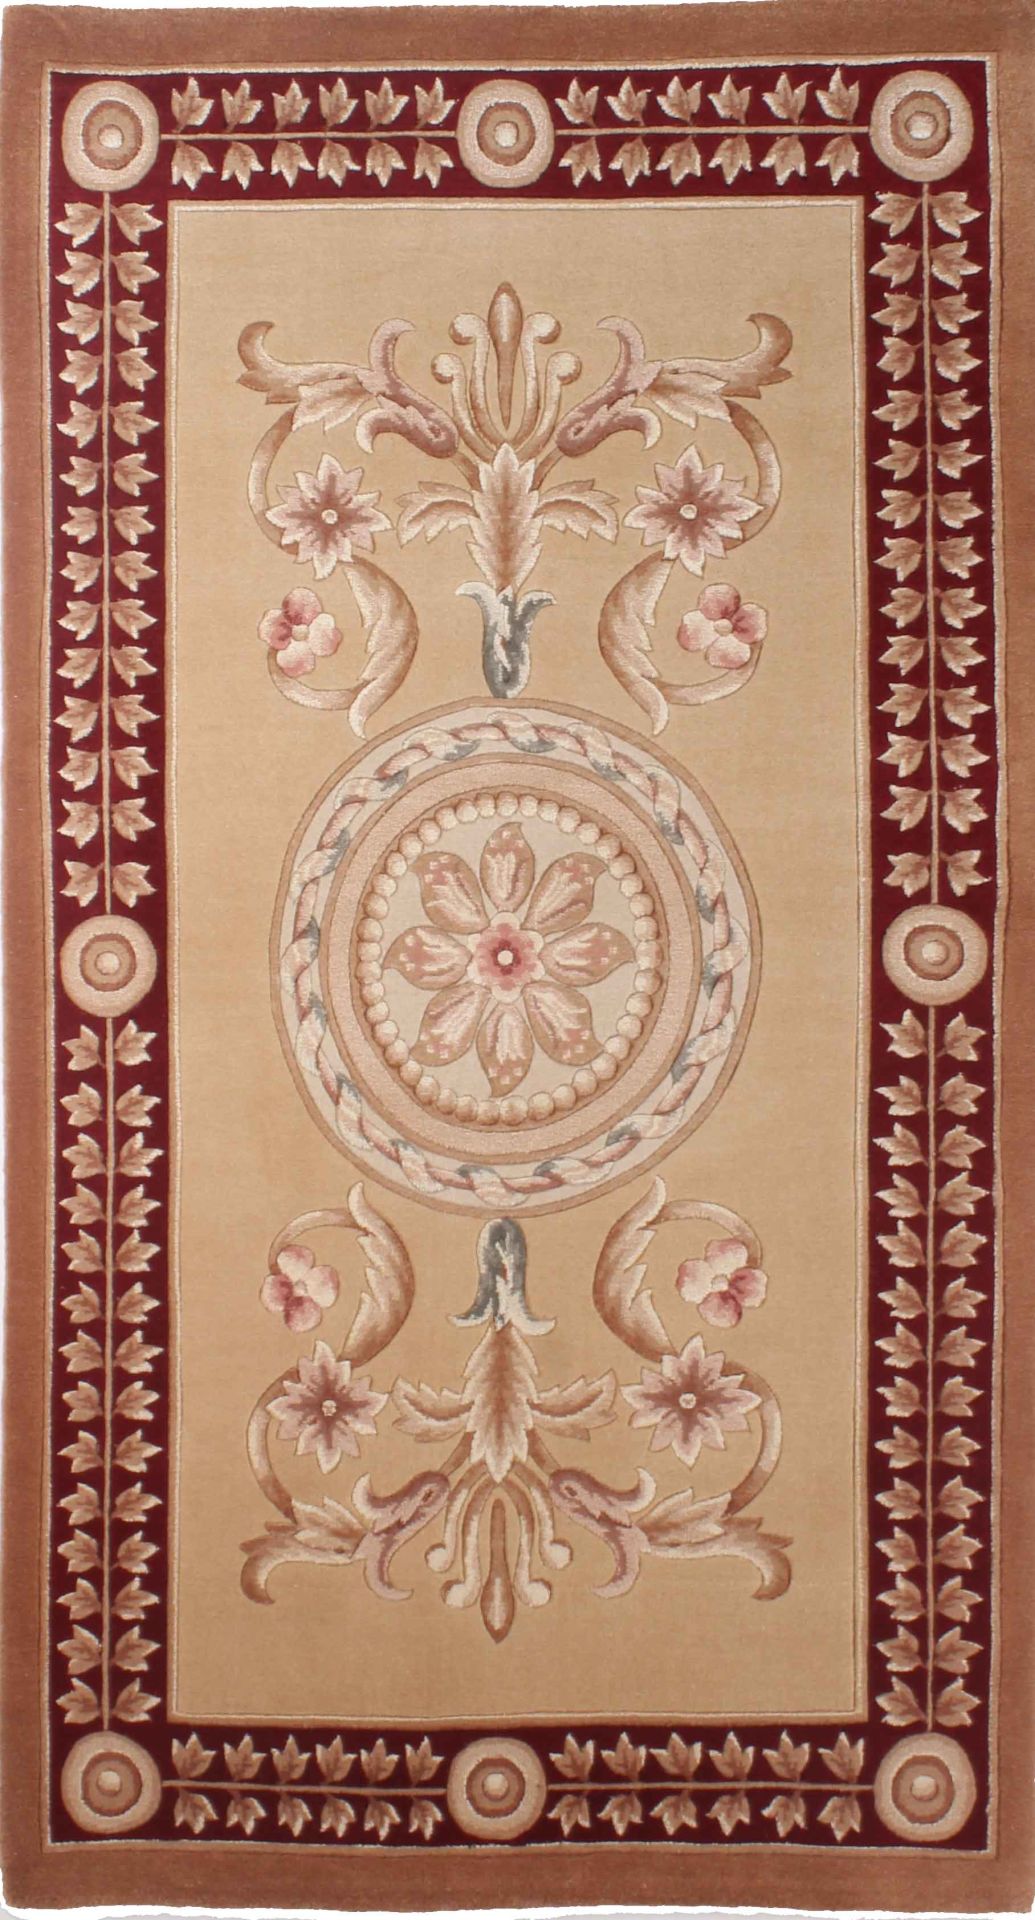  Small Size Carpet with Medallion in the Middle